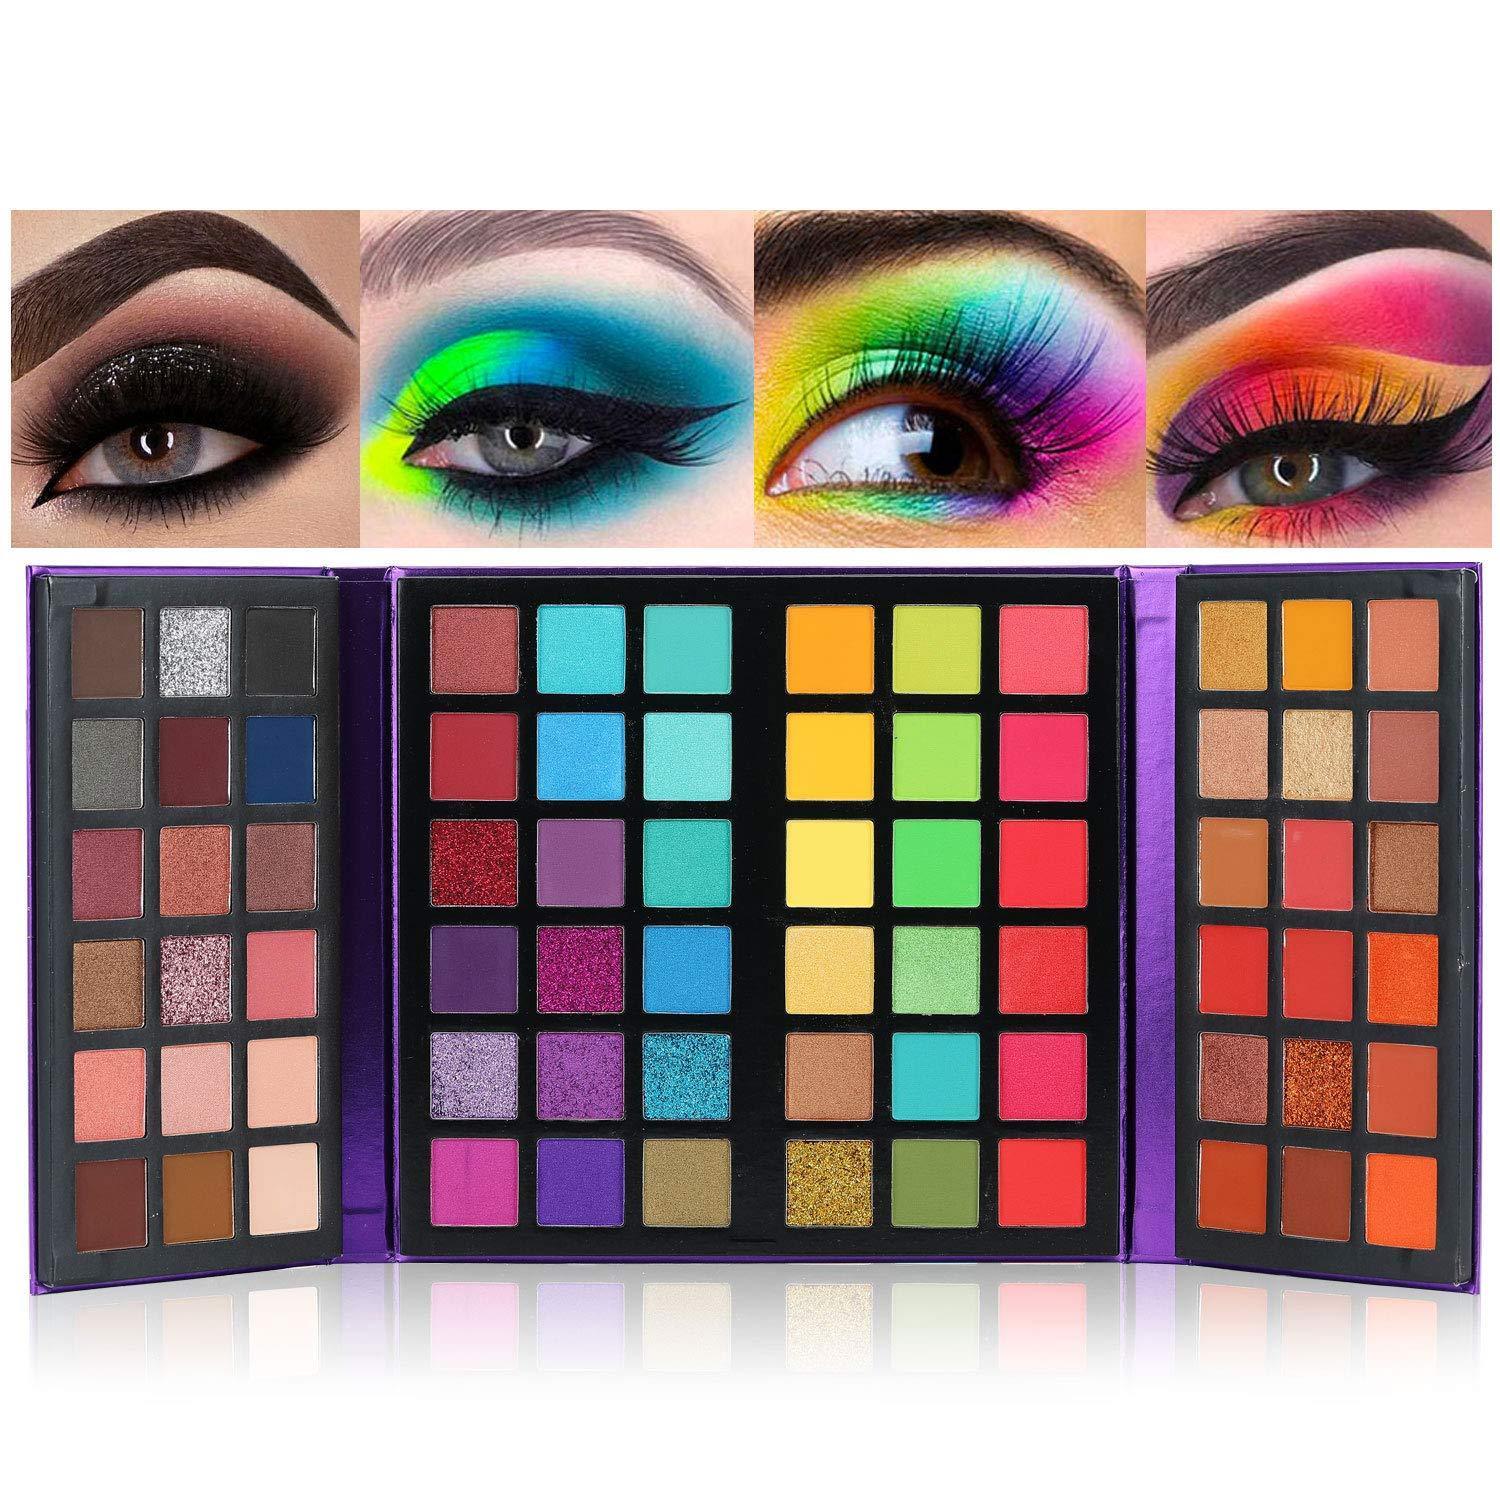 

72 Color Eyeshadow Palette Pigment Board Shimmer Glitter Matte Finish, Rainbow Color Tone, Nude Makeup All In 1 Makeup Palette